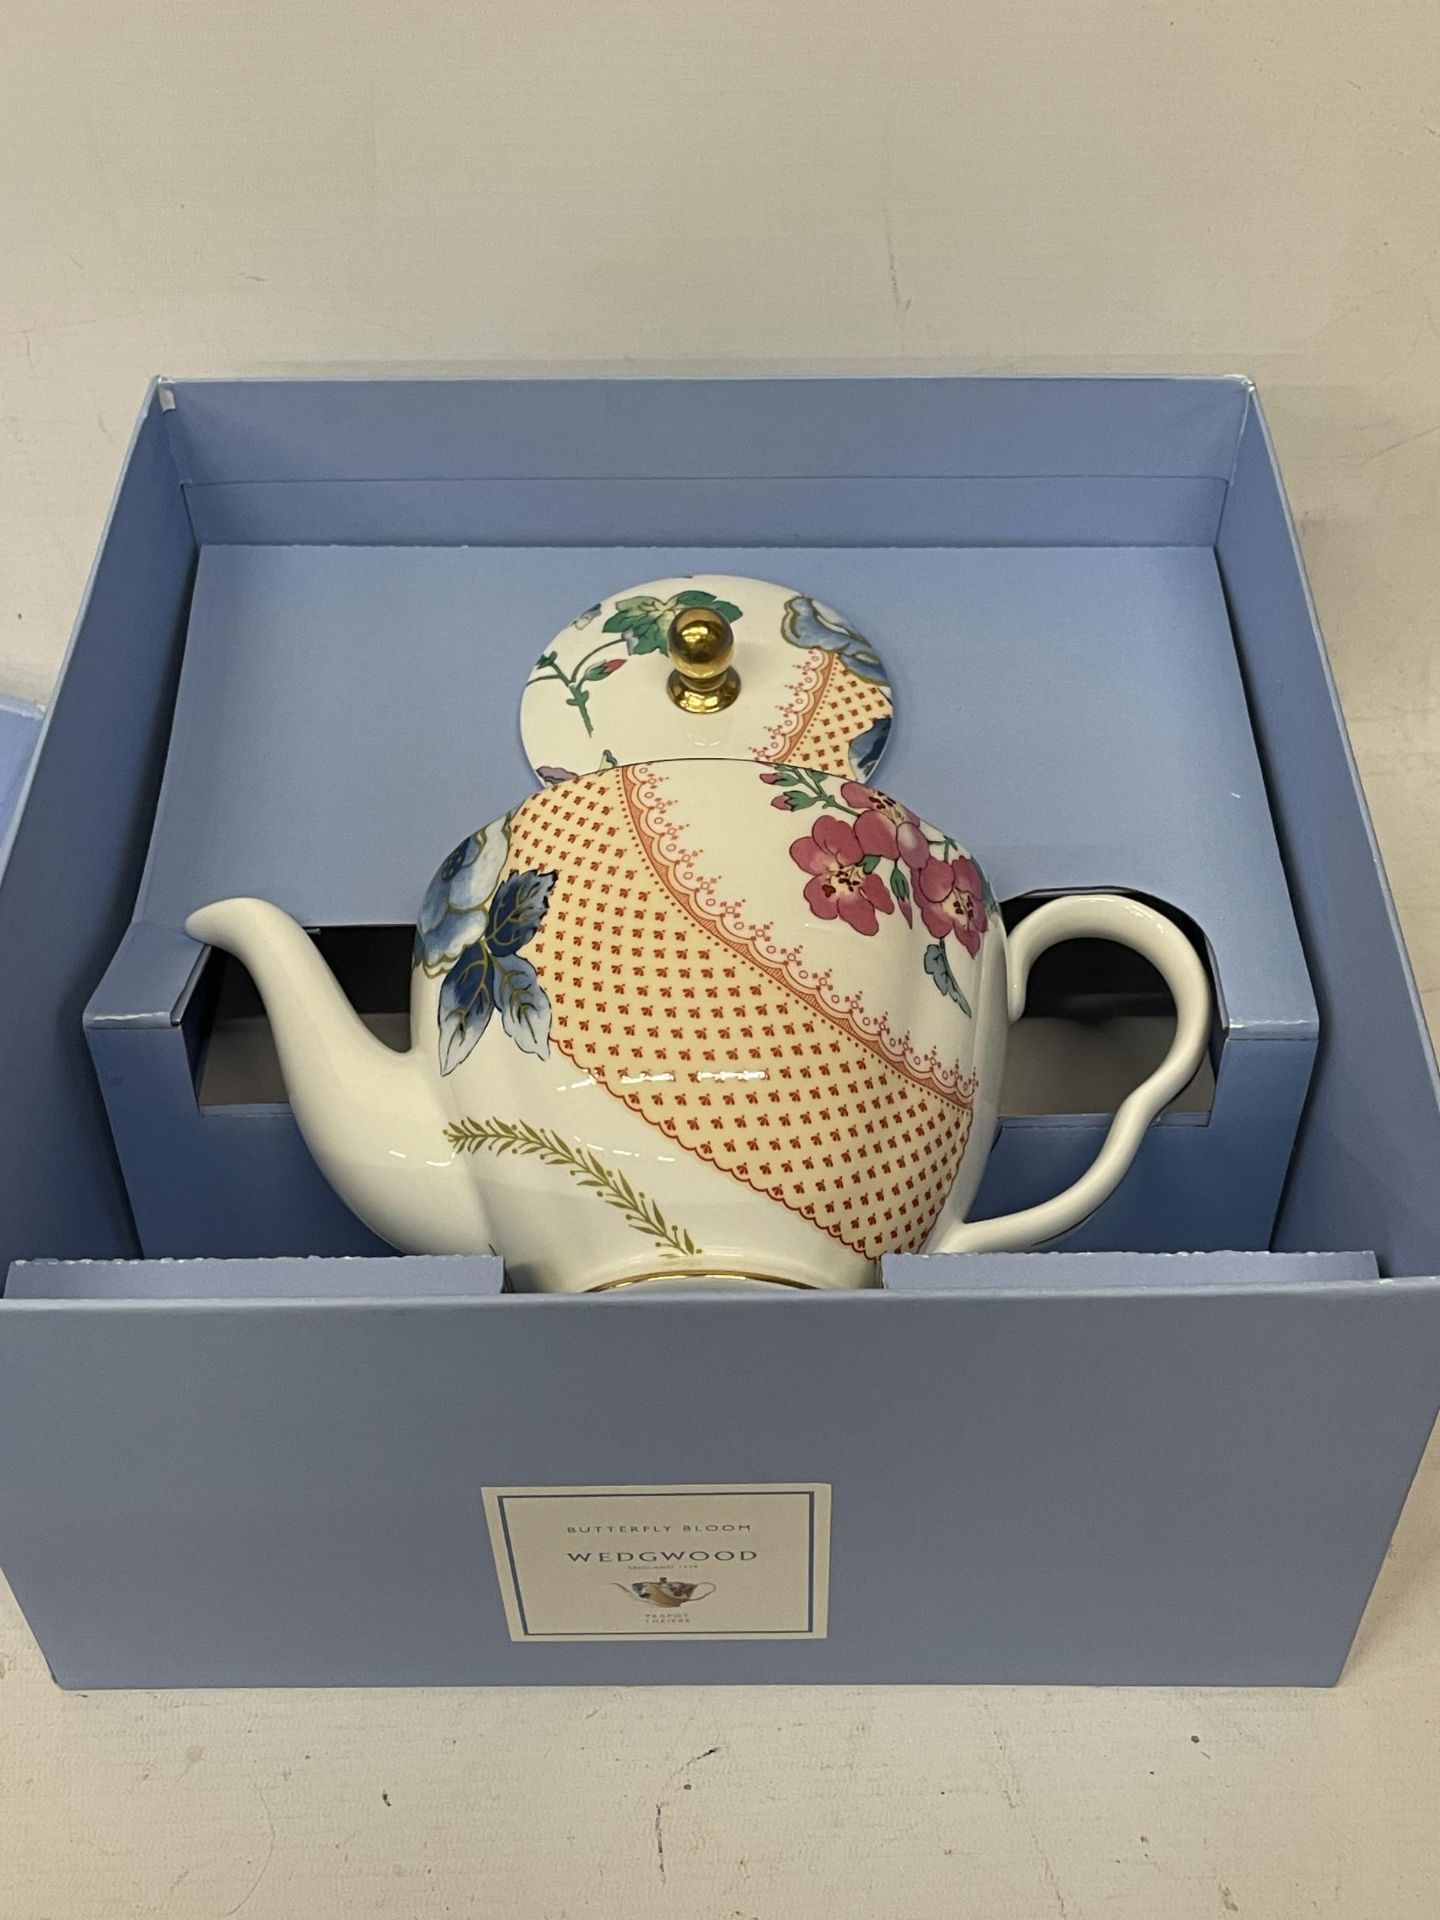 A BOXED WEDGWOOD TEAPOT BUTTERFLY BLOOM